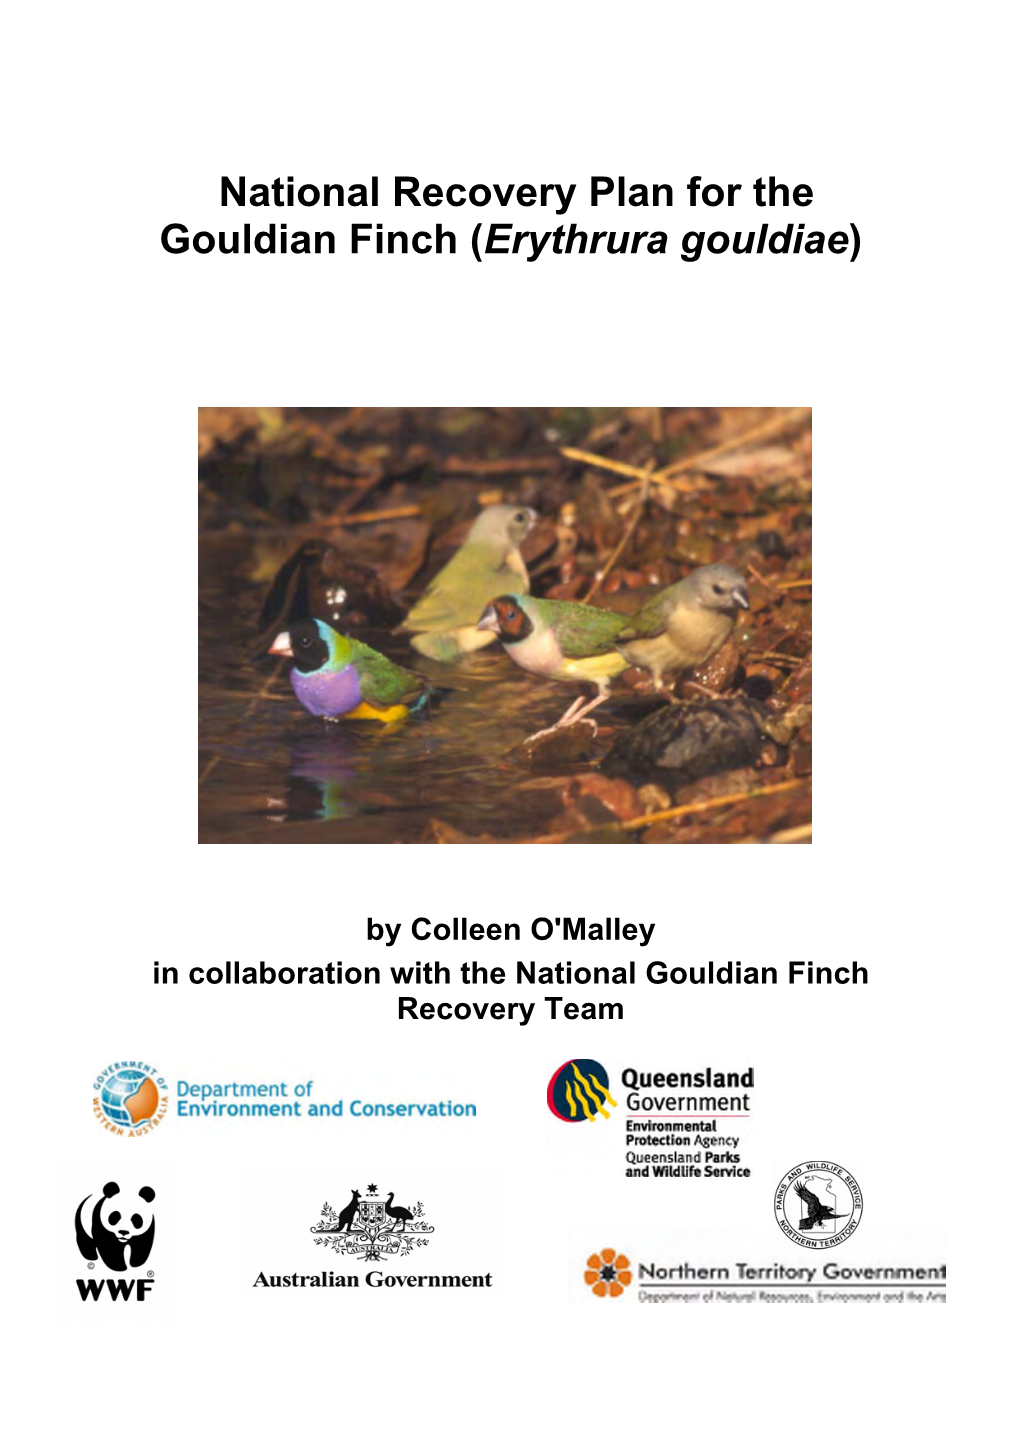 National Recovery Plan for the Gouldian Finch (Erythrura Gouldiae)